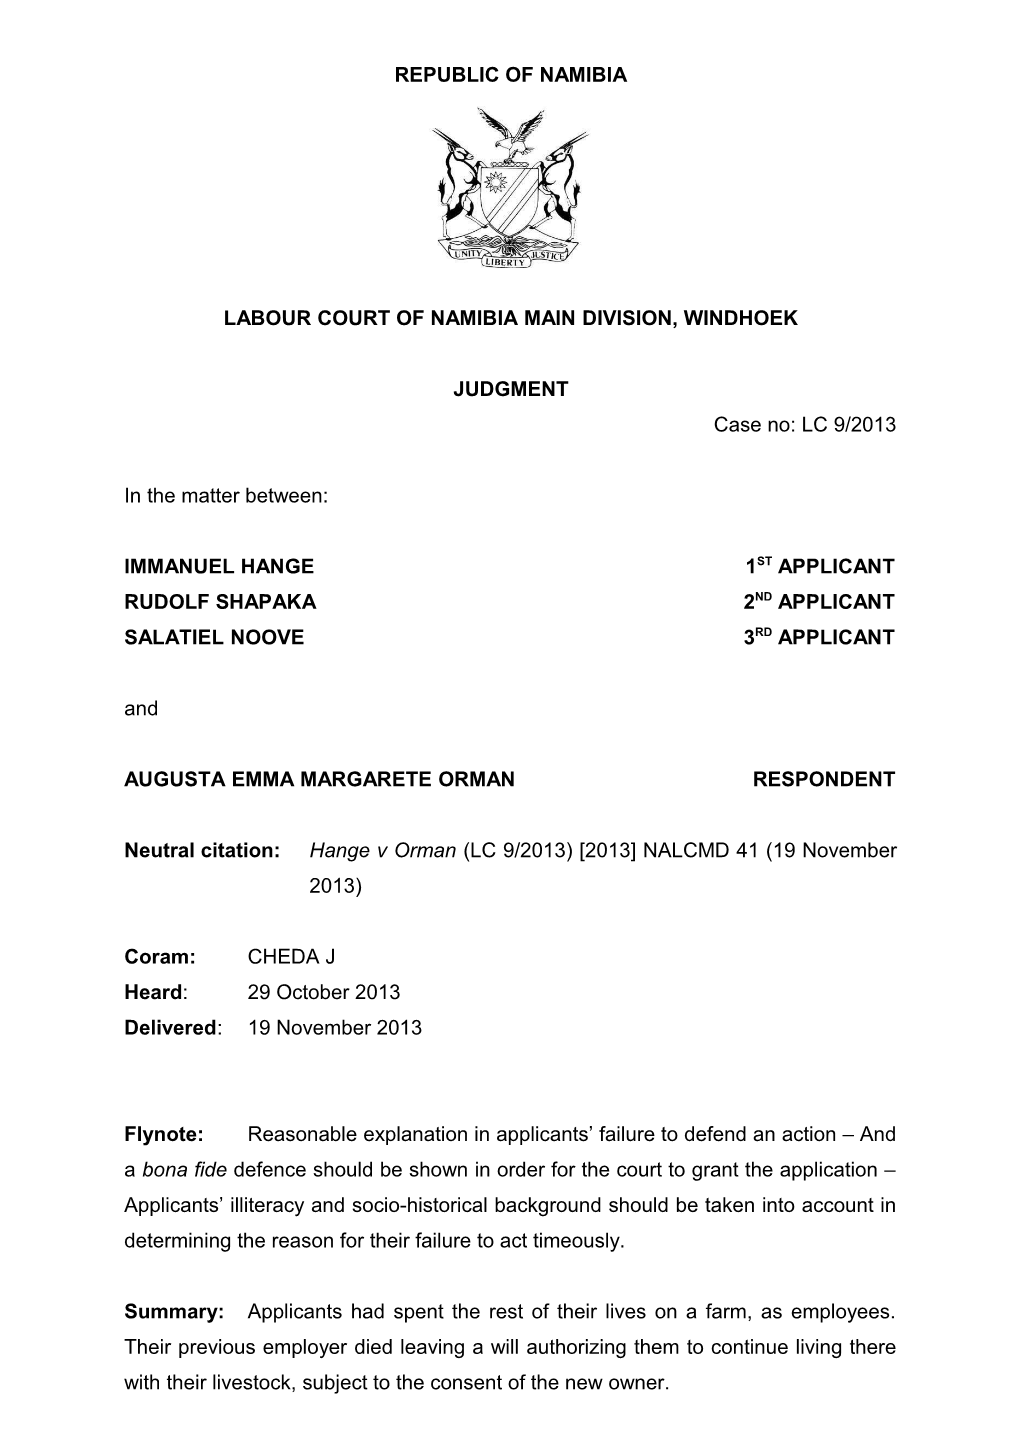 Labour Court of Namibia Main Division, Windhoek